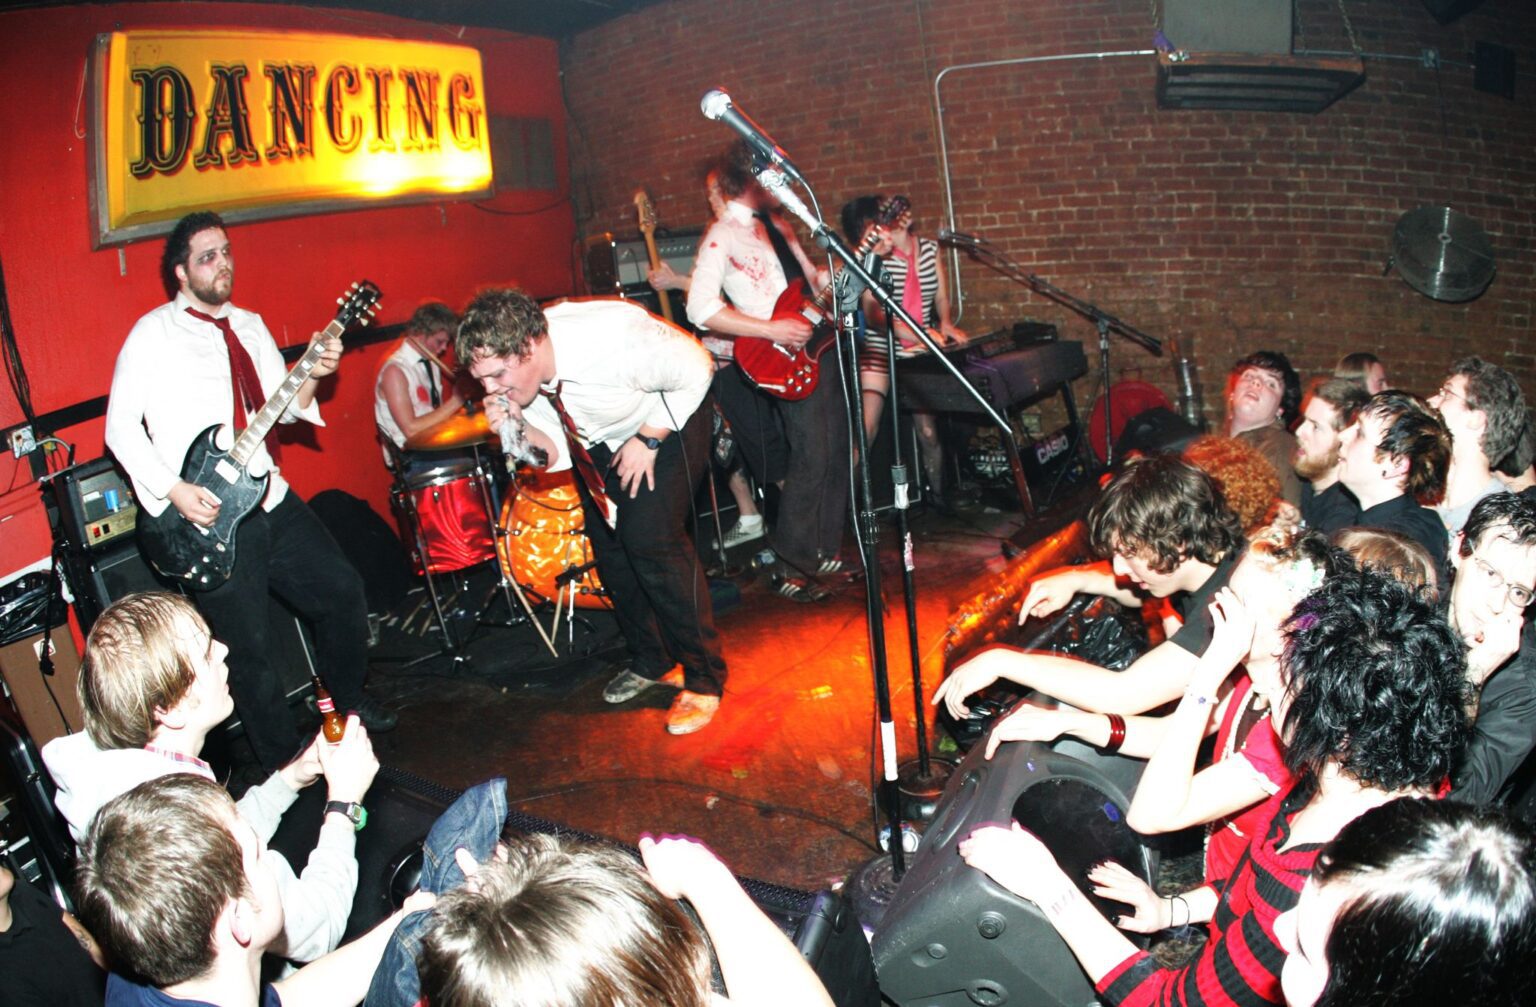 Horror rockers Black Eyes and Neckties played during a What's Up! Awards Show in 2005. Members of the band will reunite during a Saturday